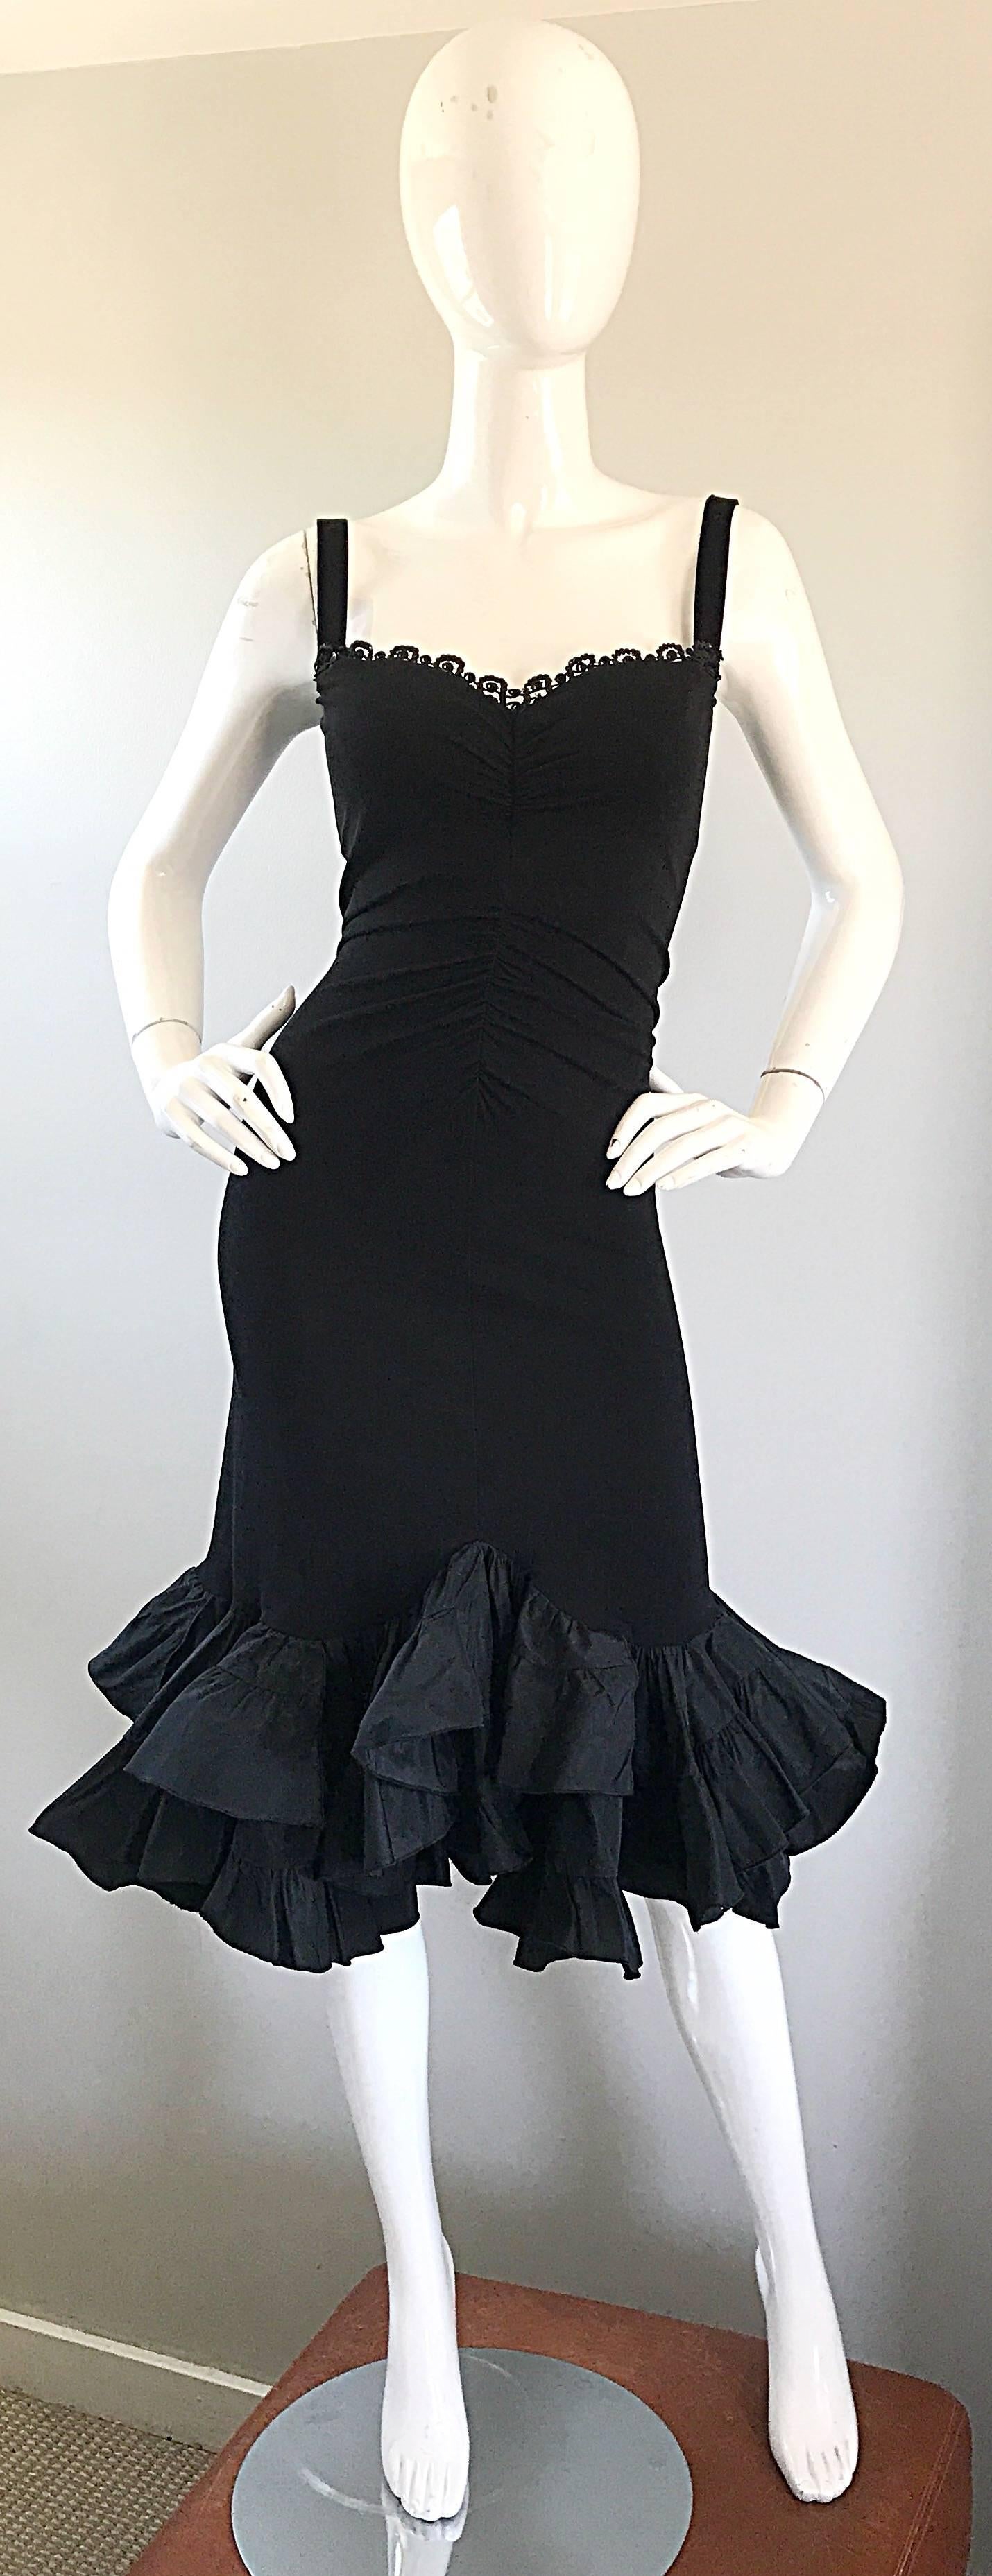 Sexy, yet sophisticated 90s MAX MARA bodcon mermaid style dress! Black rayon jersey stretches to fit. Embroidery and sequin detail above the bust. Black velvet straps. Lots of built-in interior support at the bust. Flattering ruched detail down the